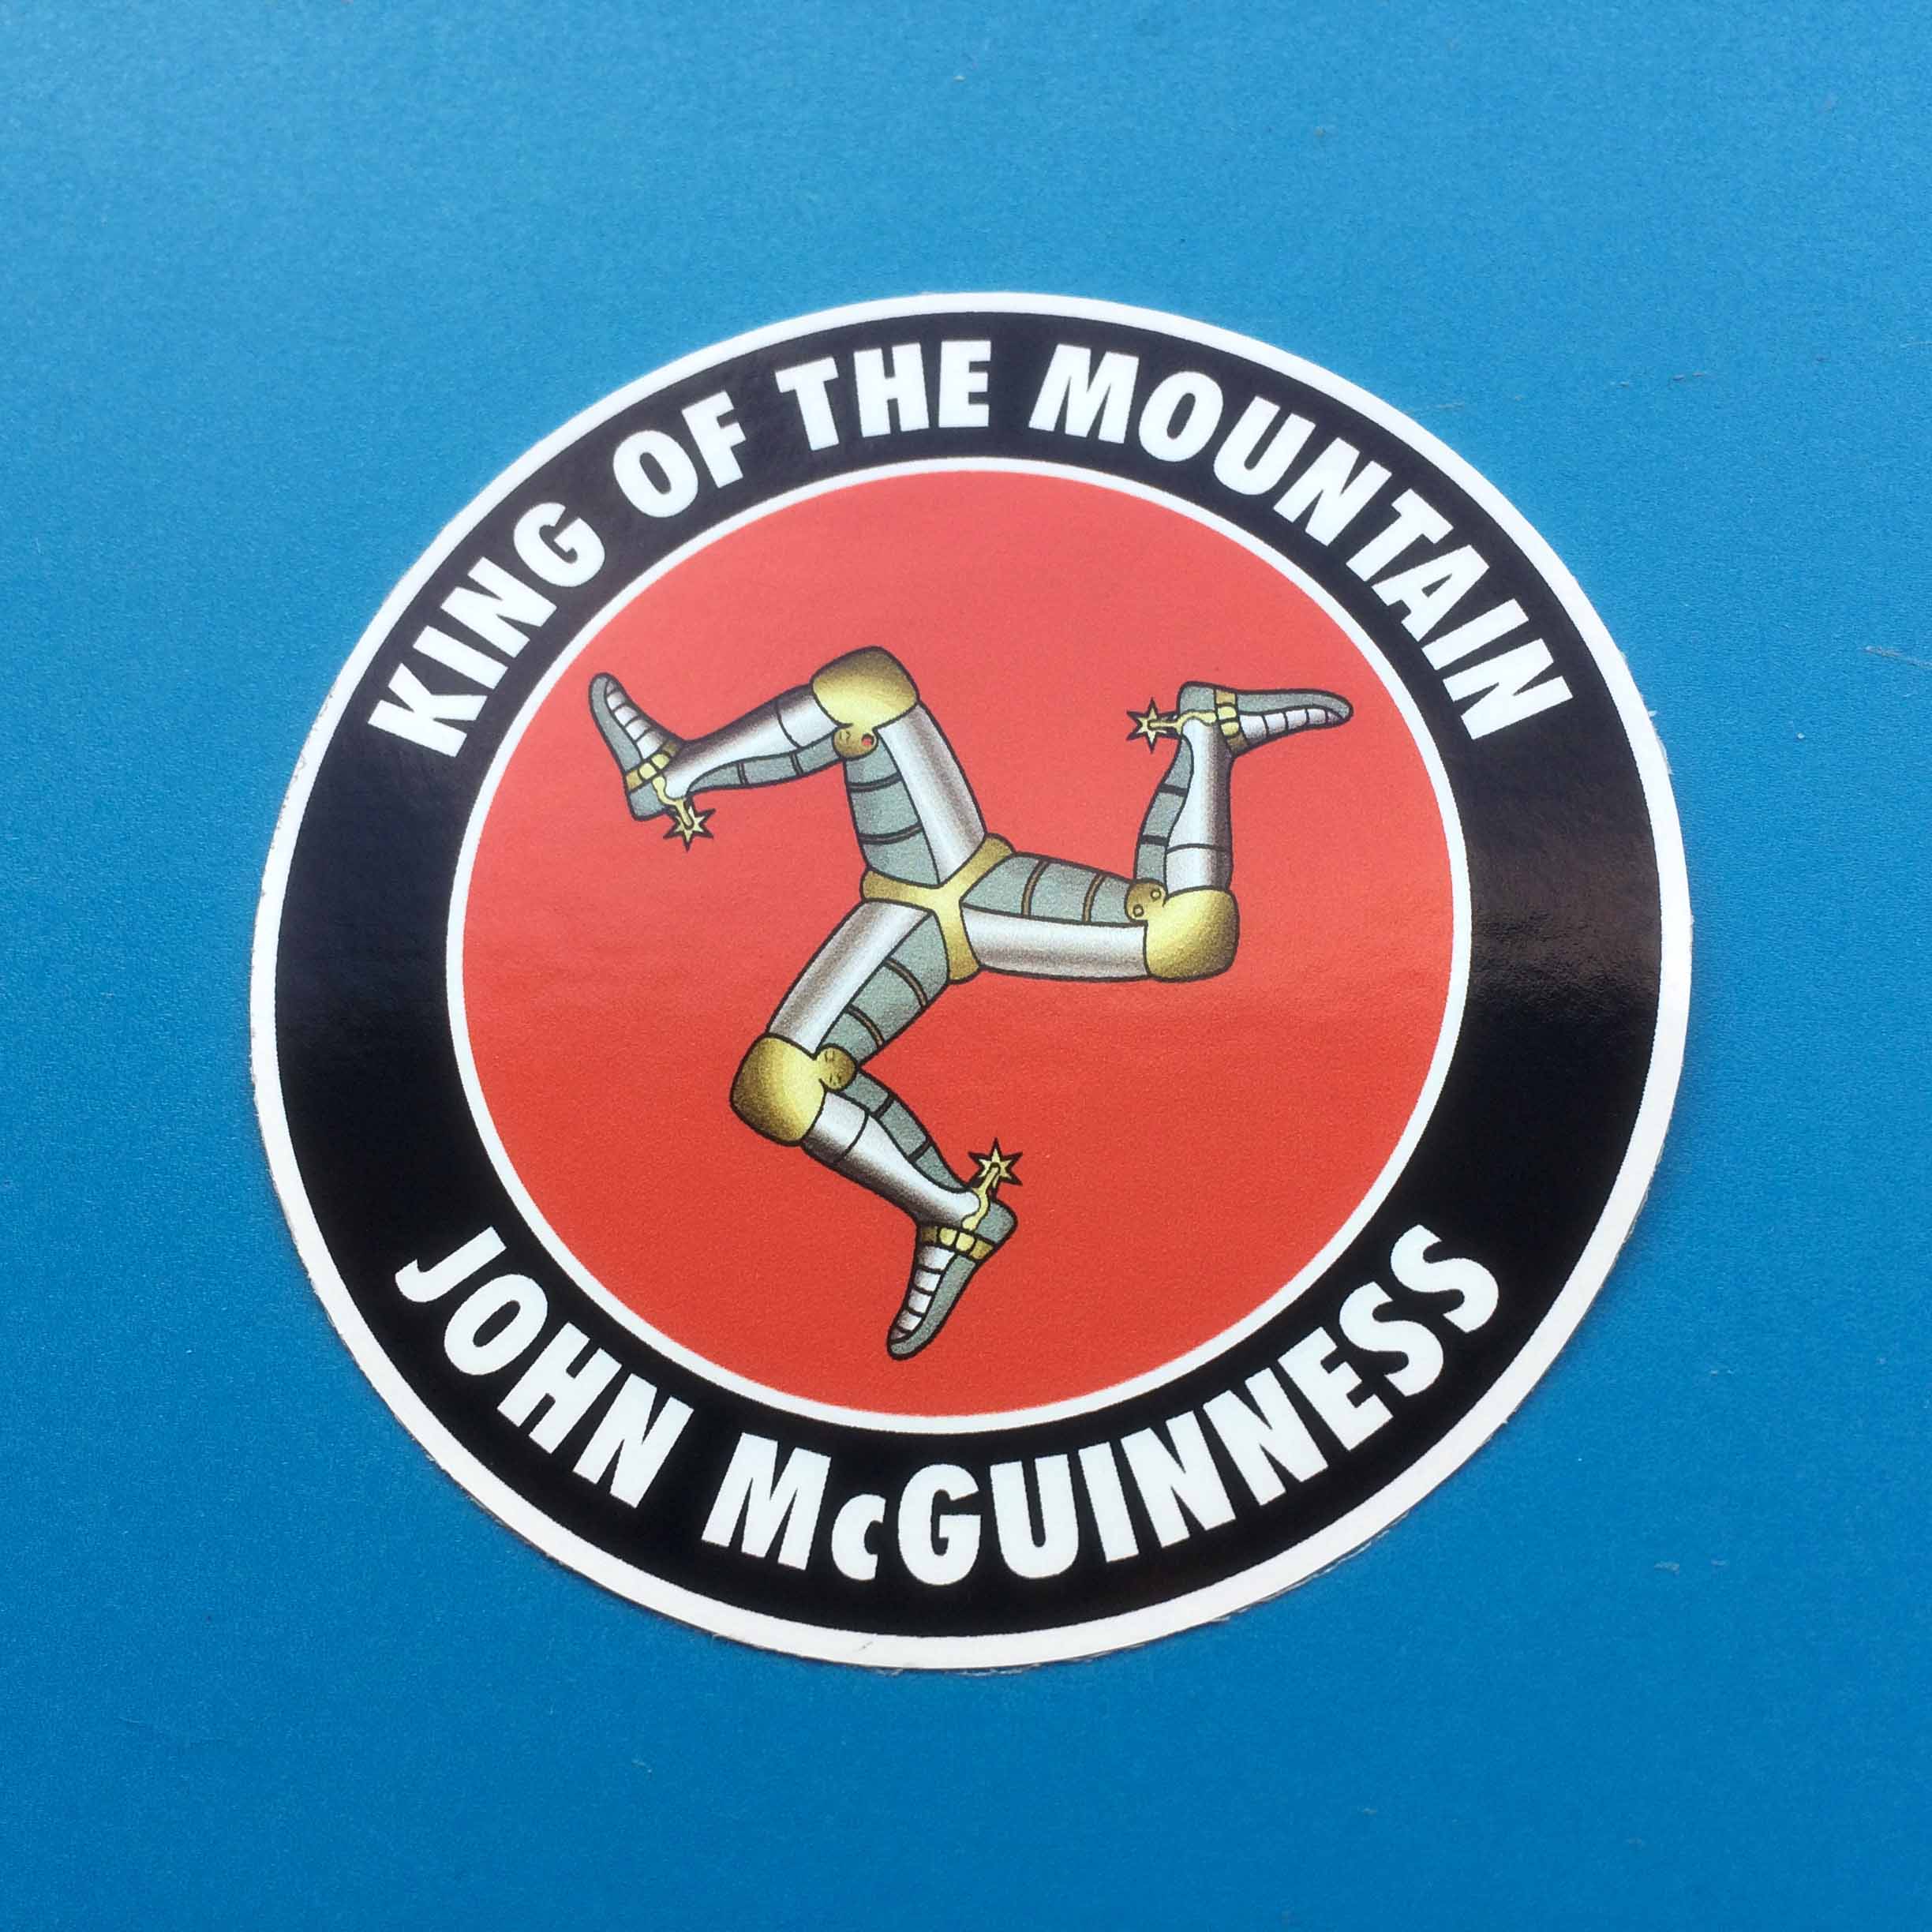 King Of The Mountain John McGuiness in white lettering on a black outer circle. A red inner circle contains three armoured legs with golden spurs.